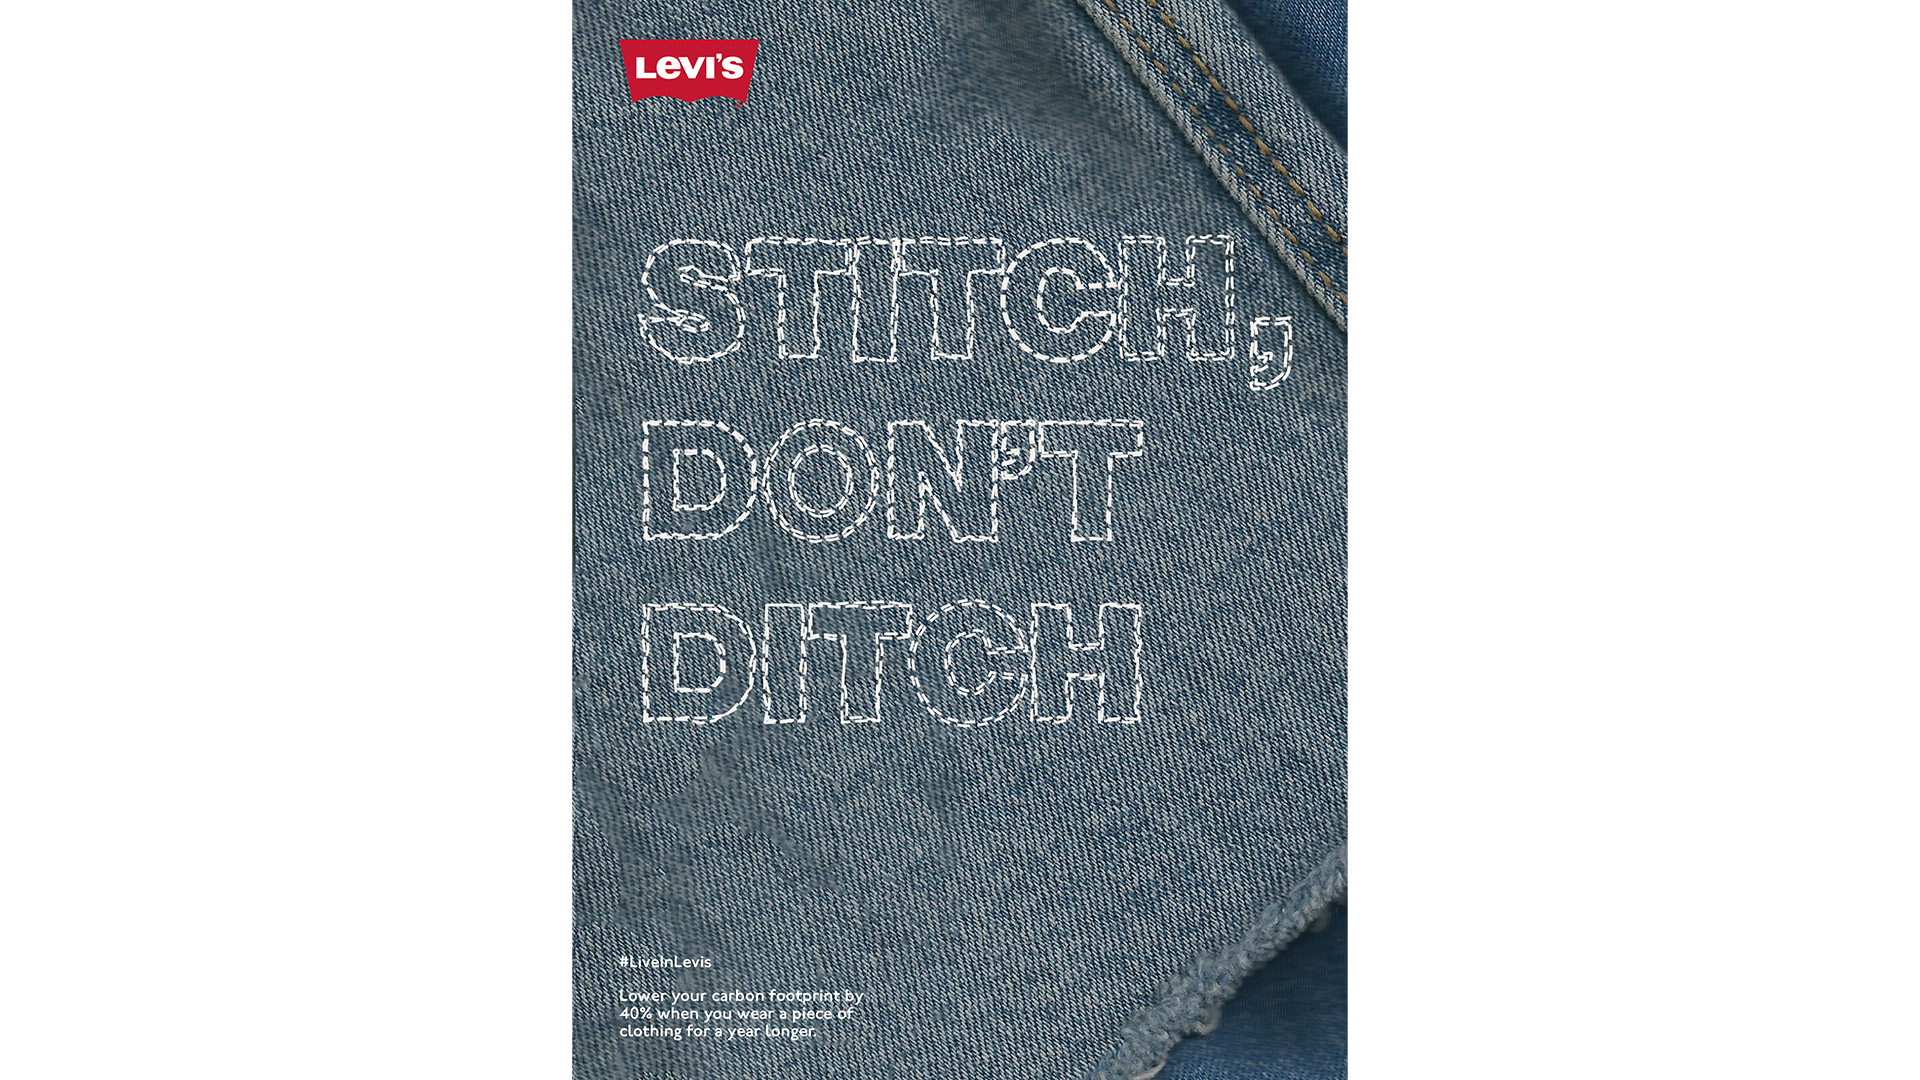 Poster mockup featuring a photograph of a piece of denim. In stitched lettering, the words 'stitch don't ditch' are overlaid on the denim, alongside the Levi's logo.